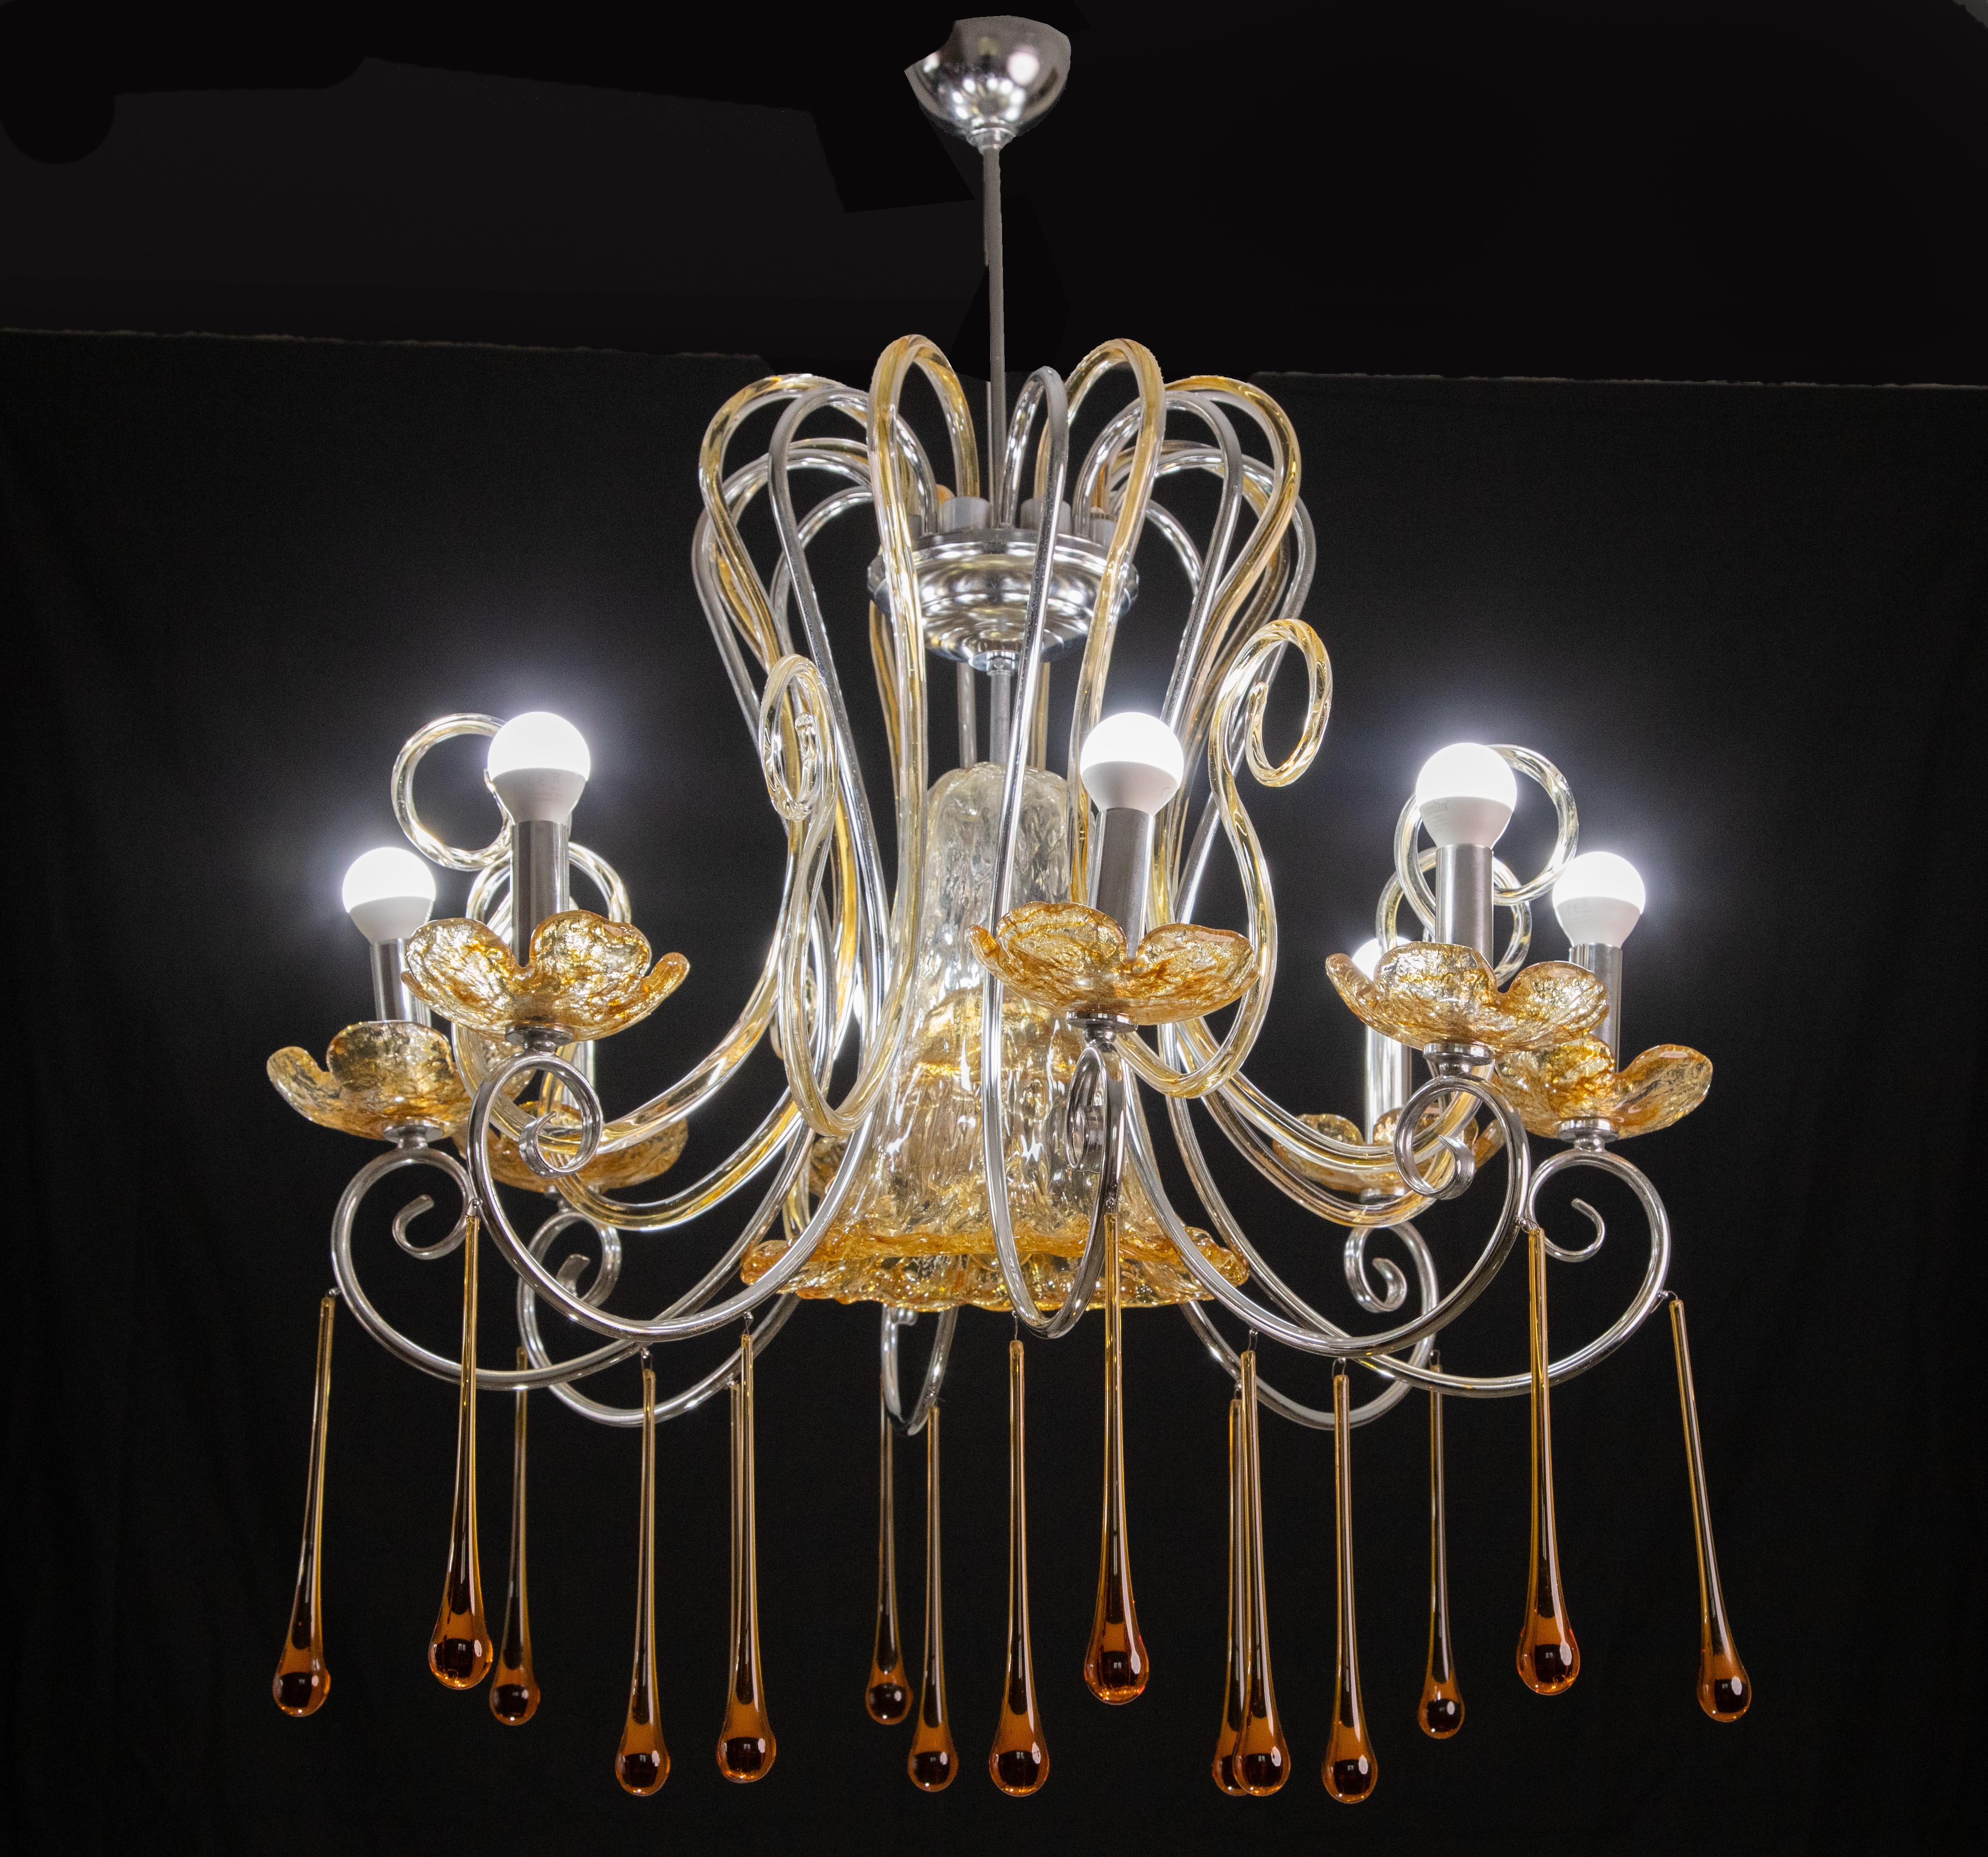 Spectacular Murano chandelier filled with glass elements.

The chandelier mounts 8 lights e14 European standard.

It measures 100 centimeters in height and 70 in diameter.